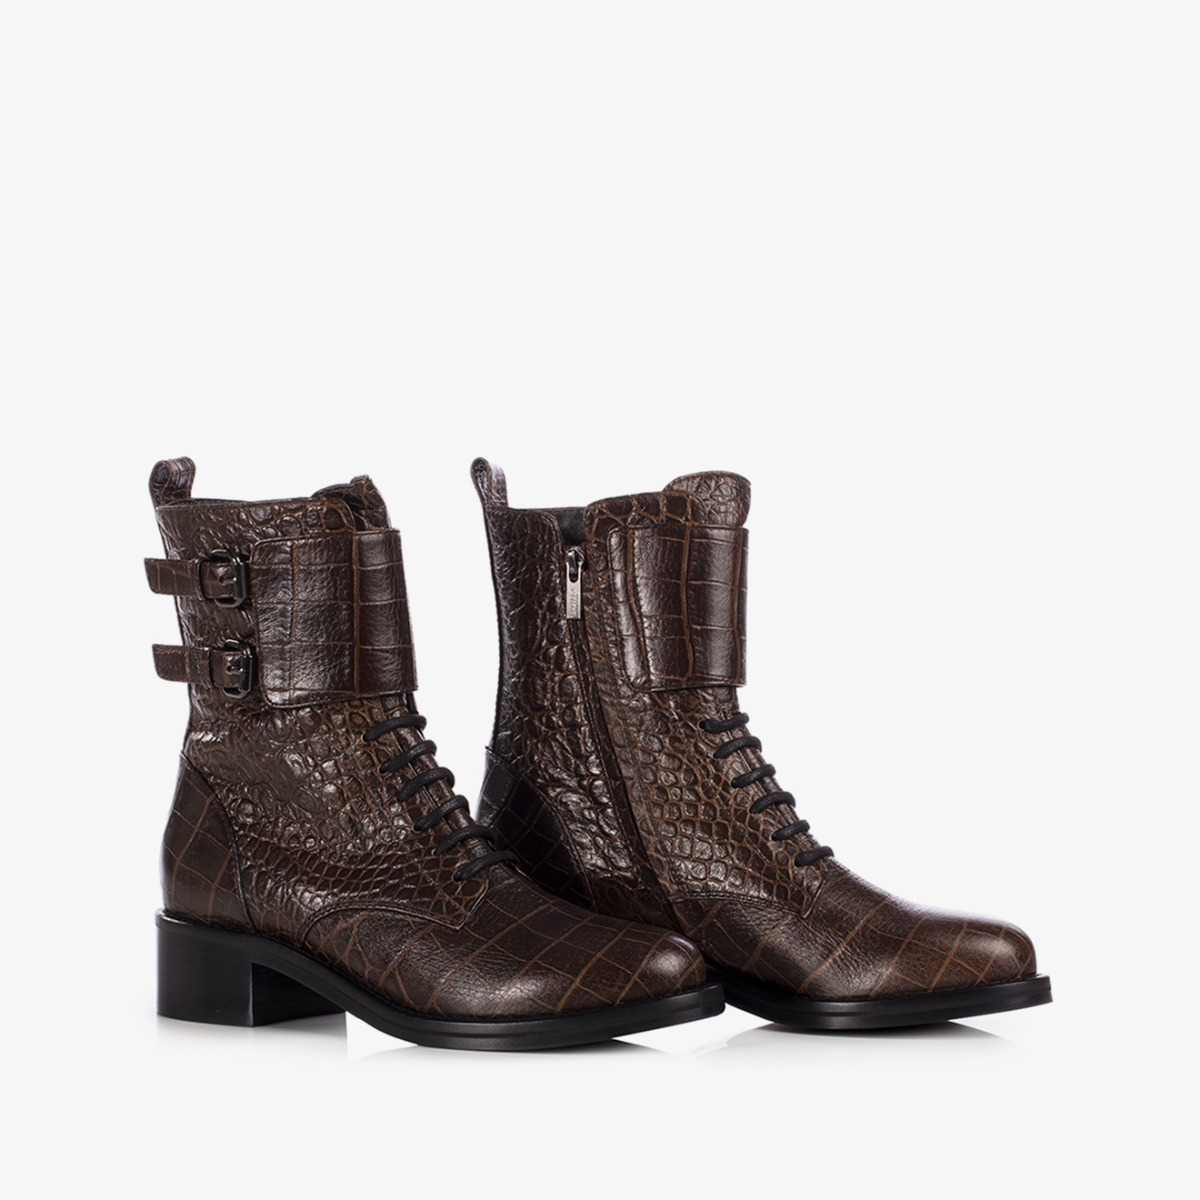 JESSI ANKLE BOOT 50 mm - Le Silla official outlet